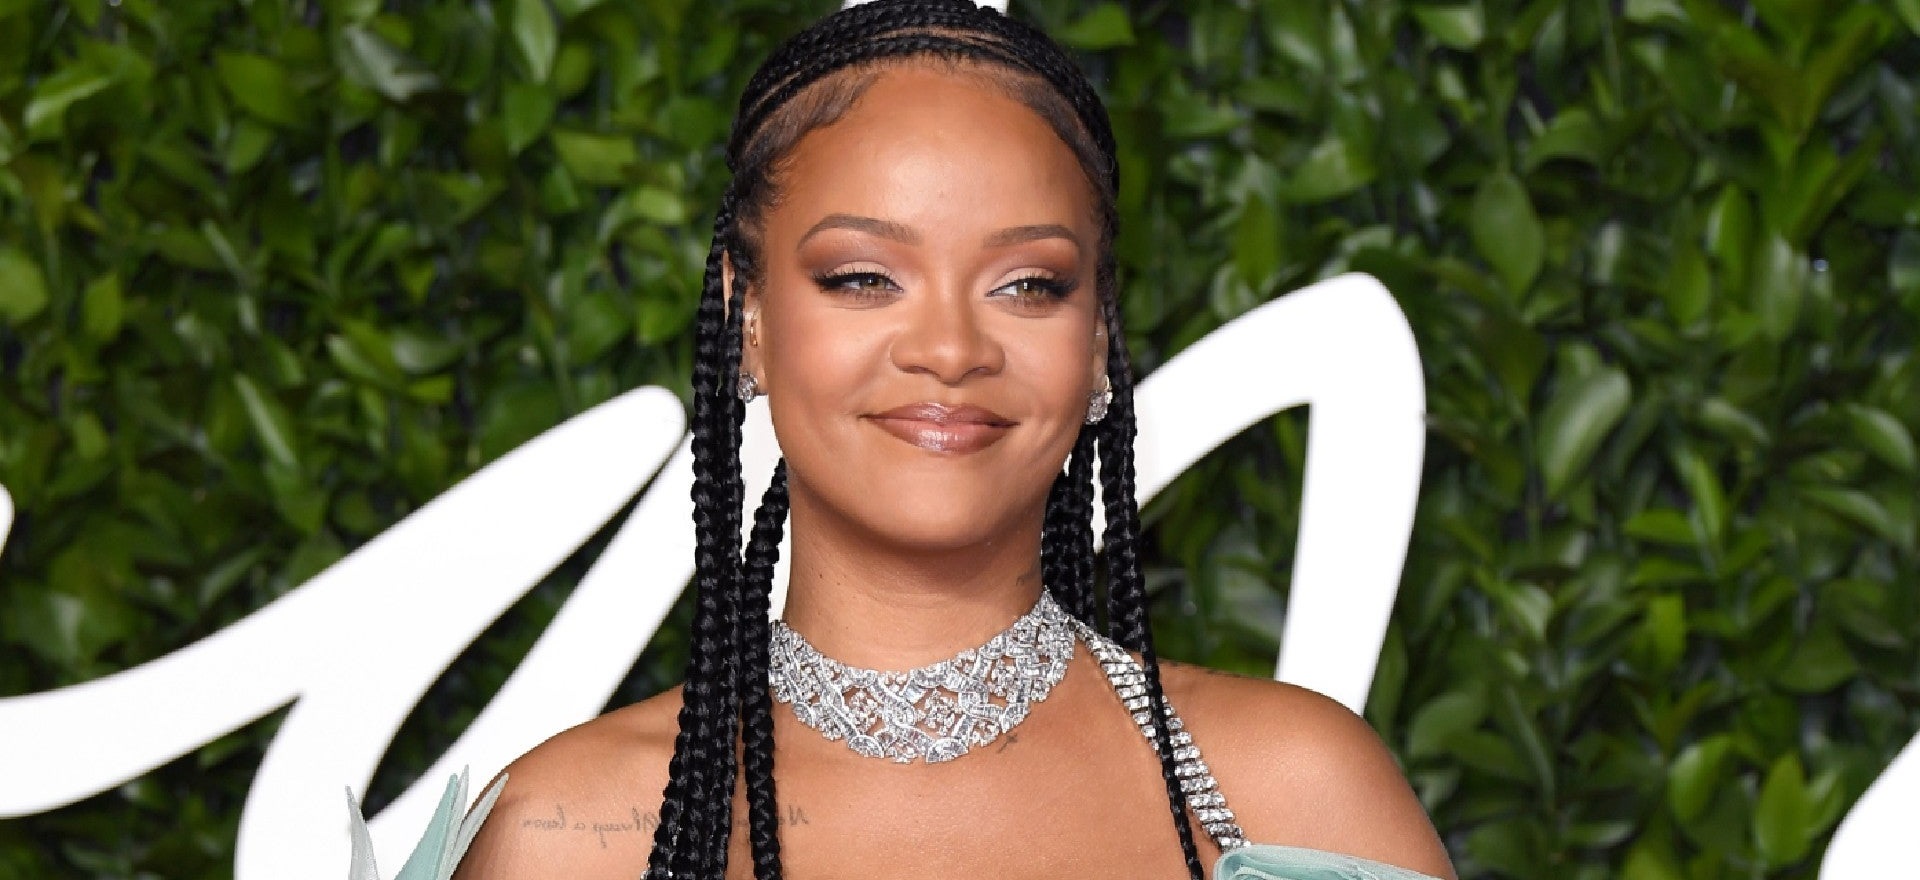 Rihanna Offered to Purchase $700k Worth of Ventilators for Barbados